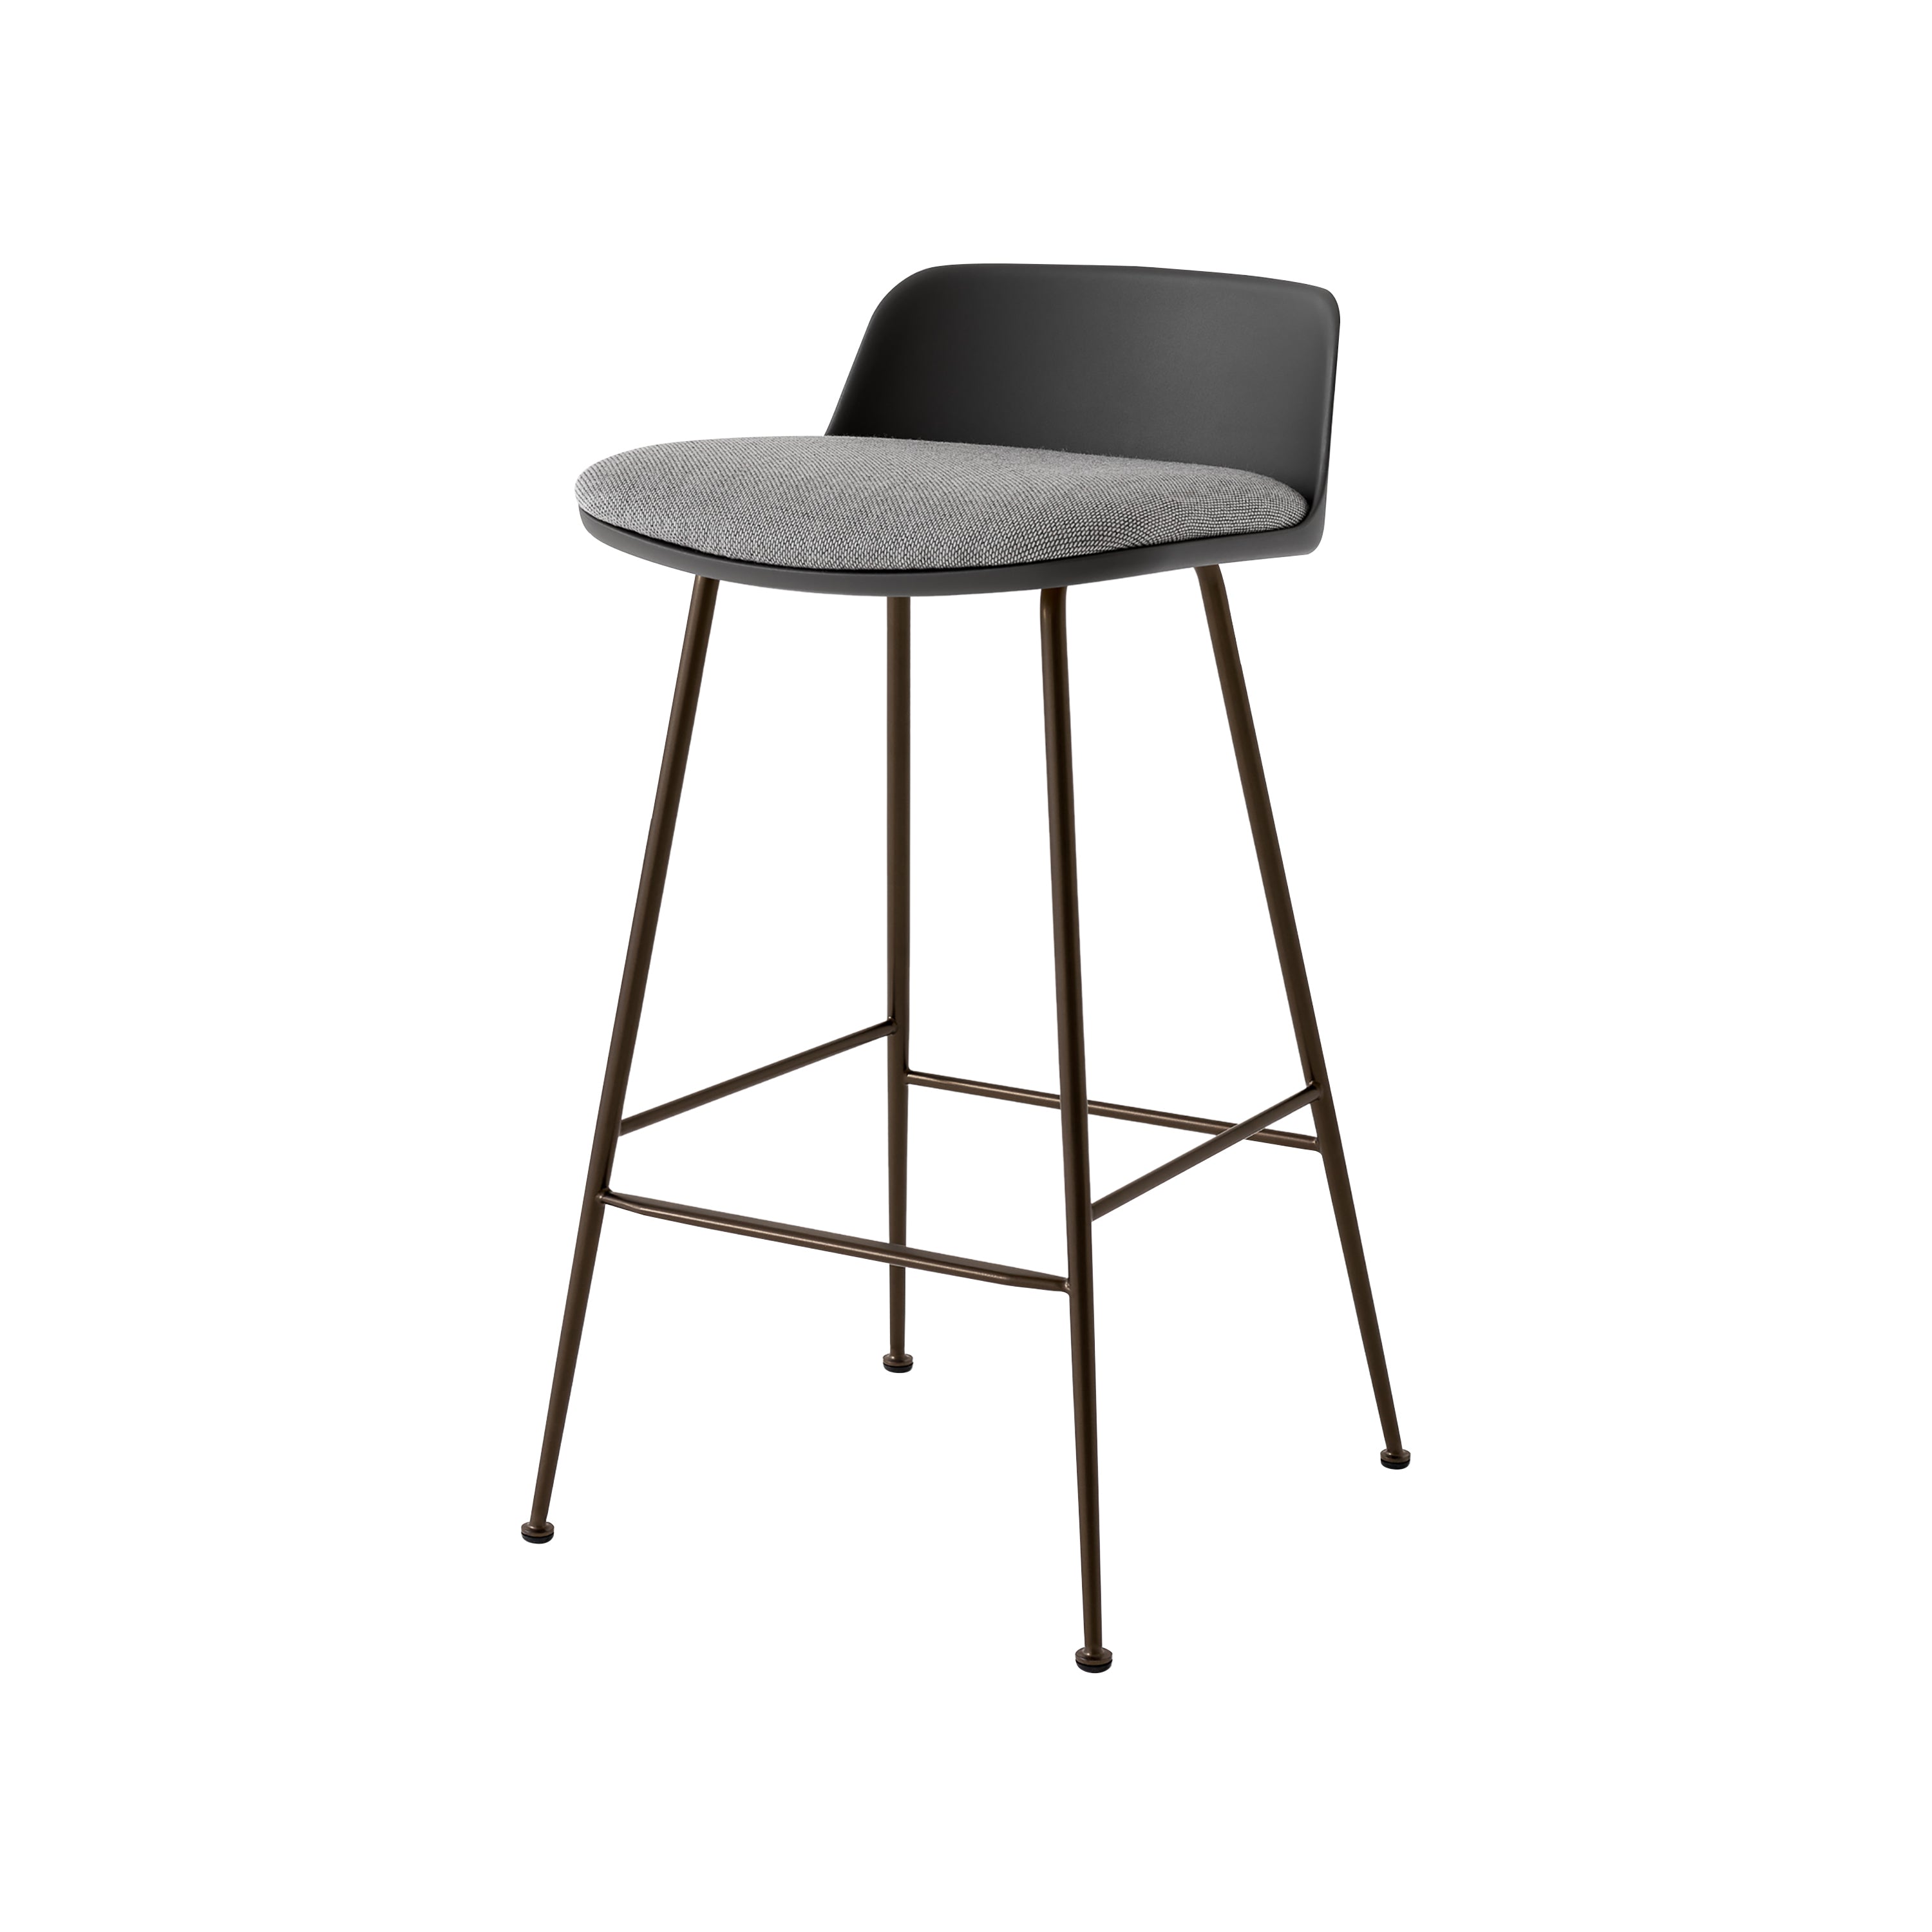 Rely Counter Stool: HW82 + Stone Grey + Bronzed